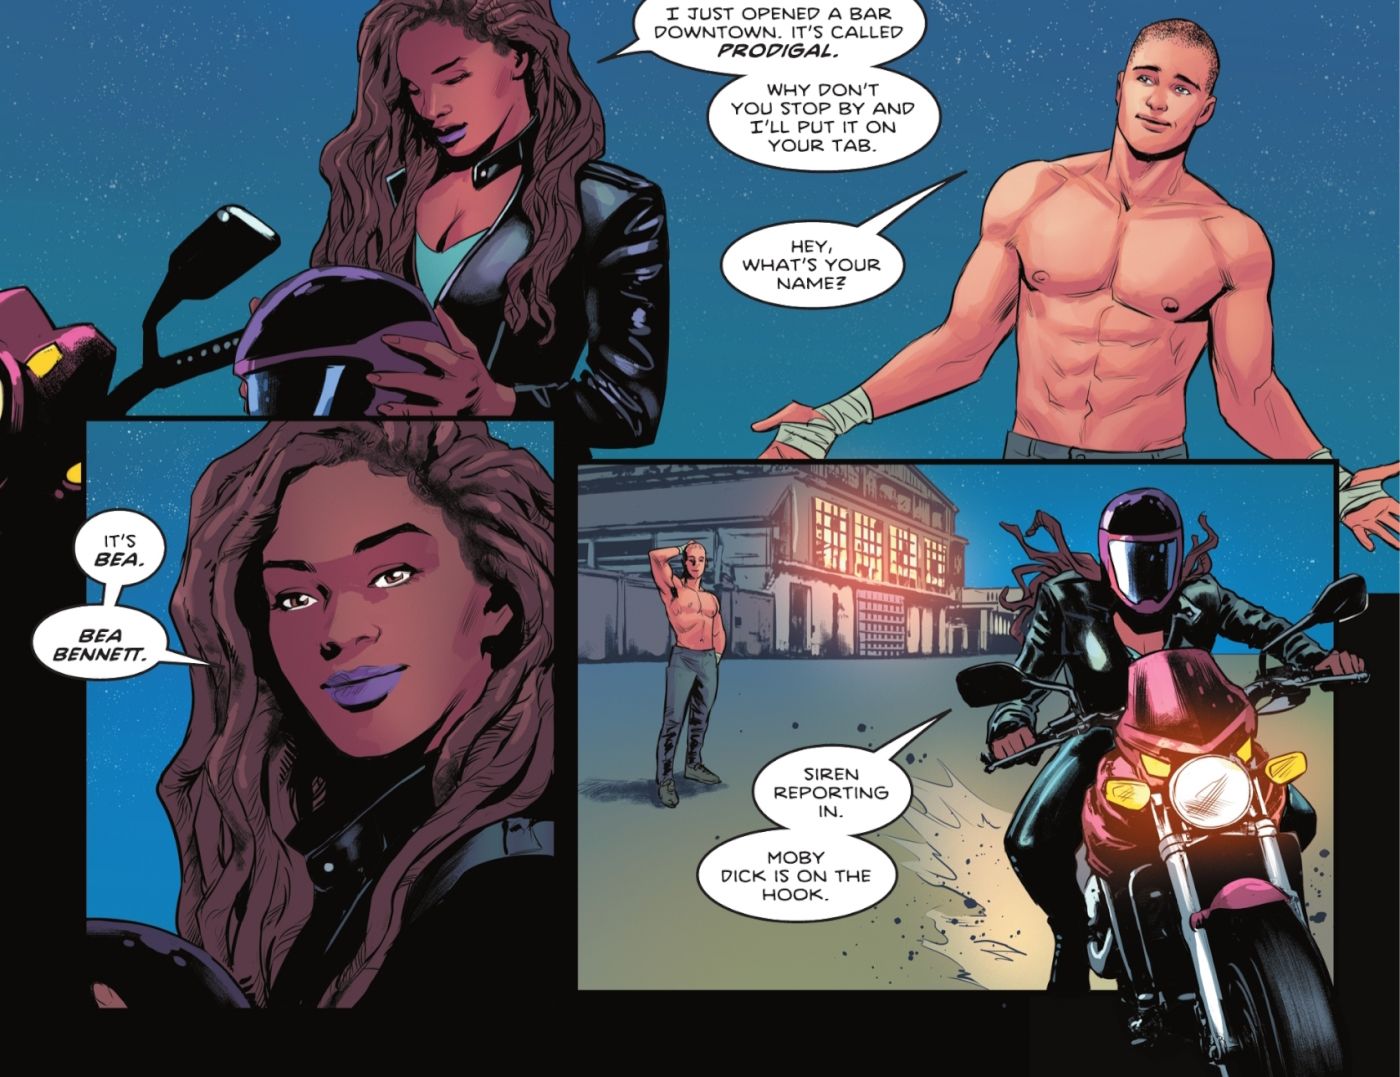 Comic book panels: Bea Bennett meets Dick / Ric Grayson before riding away on a motorcycle.